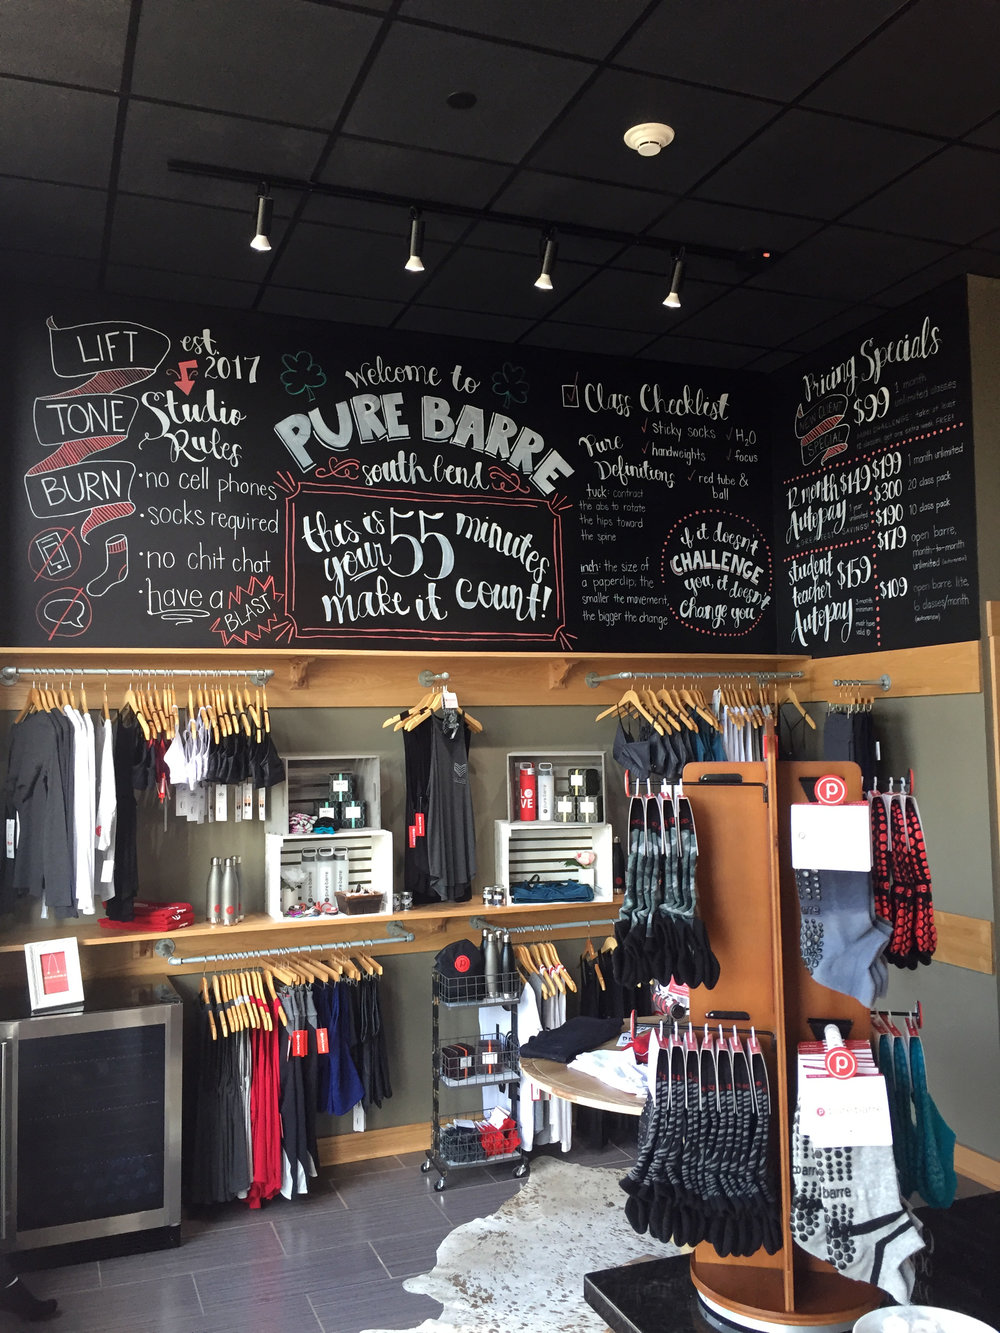 Pure Barre South Bend Mural — Brianna Dombo